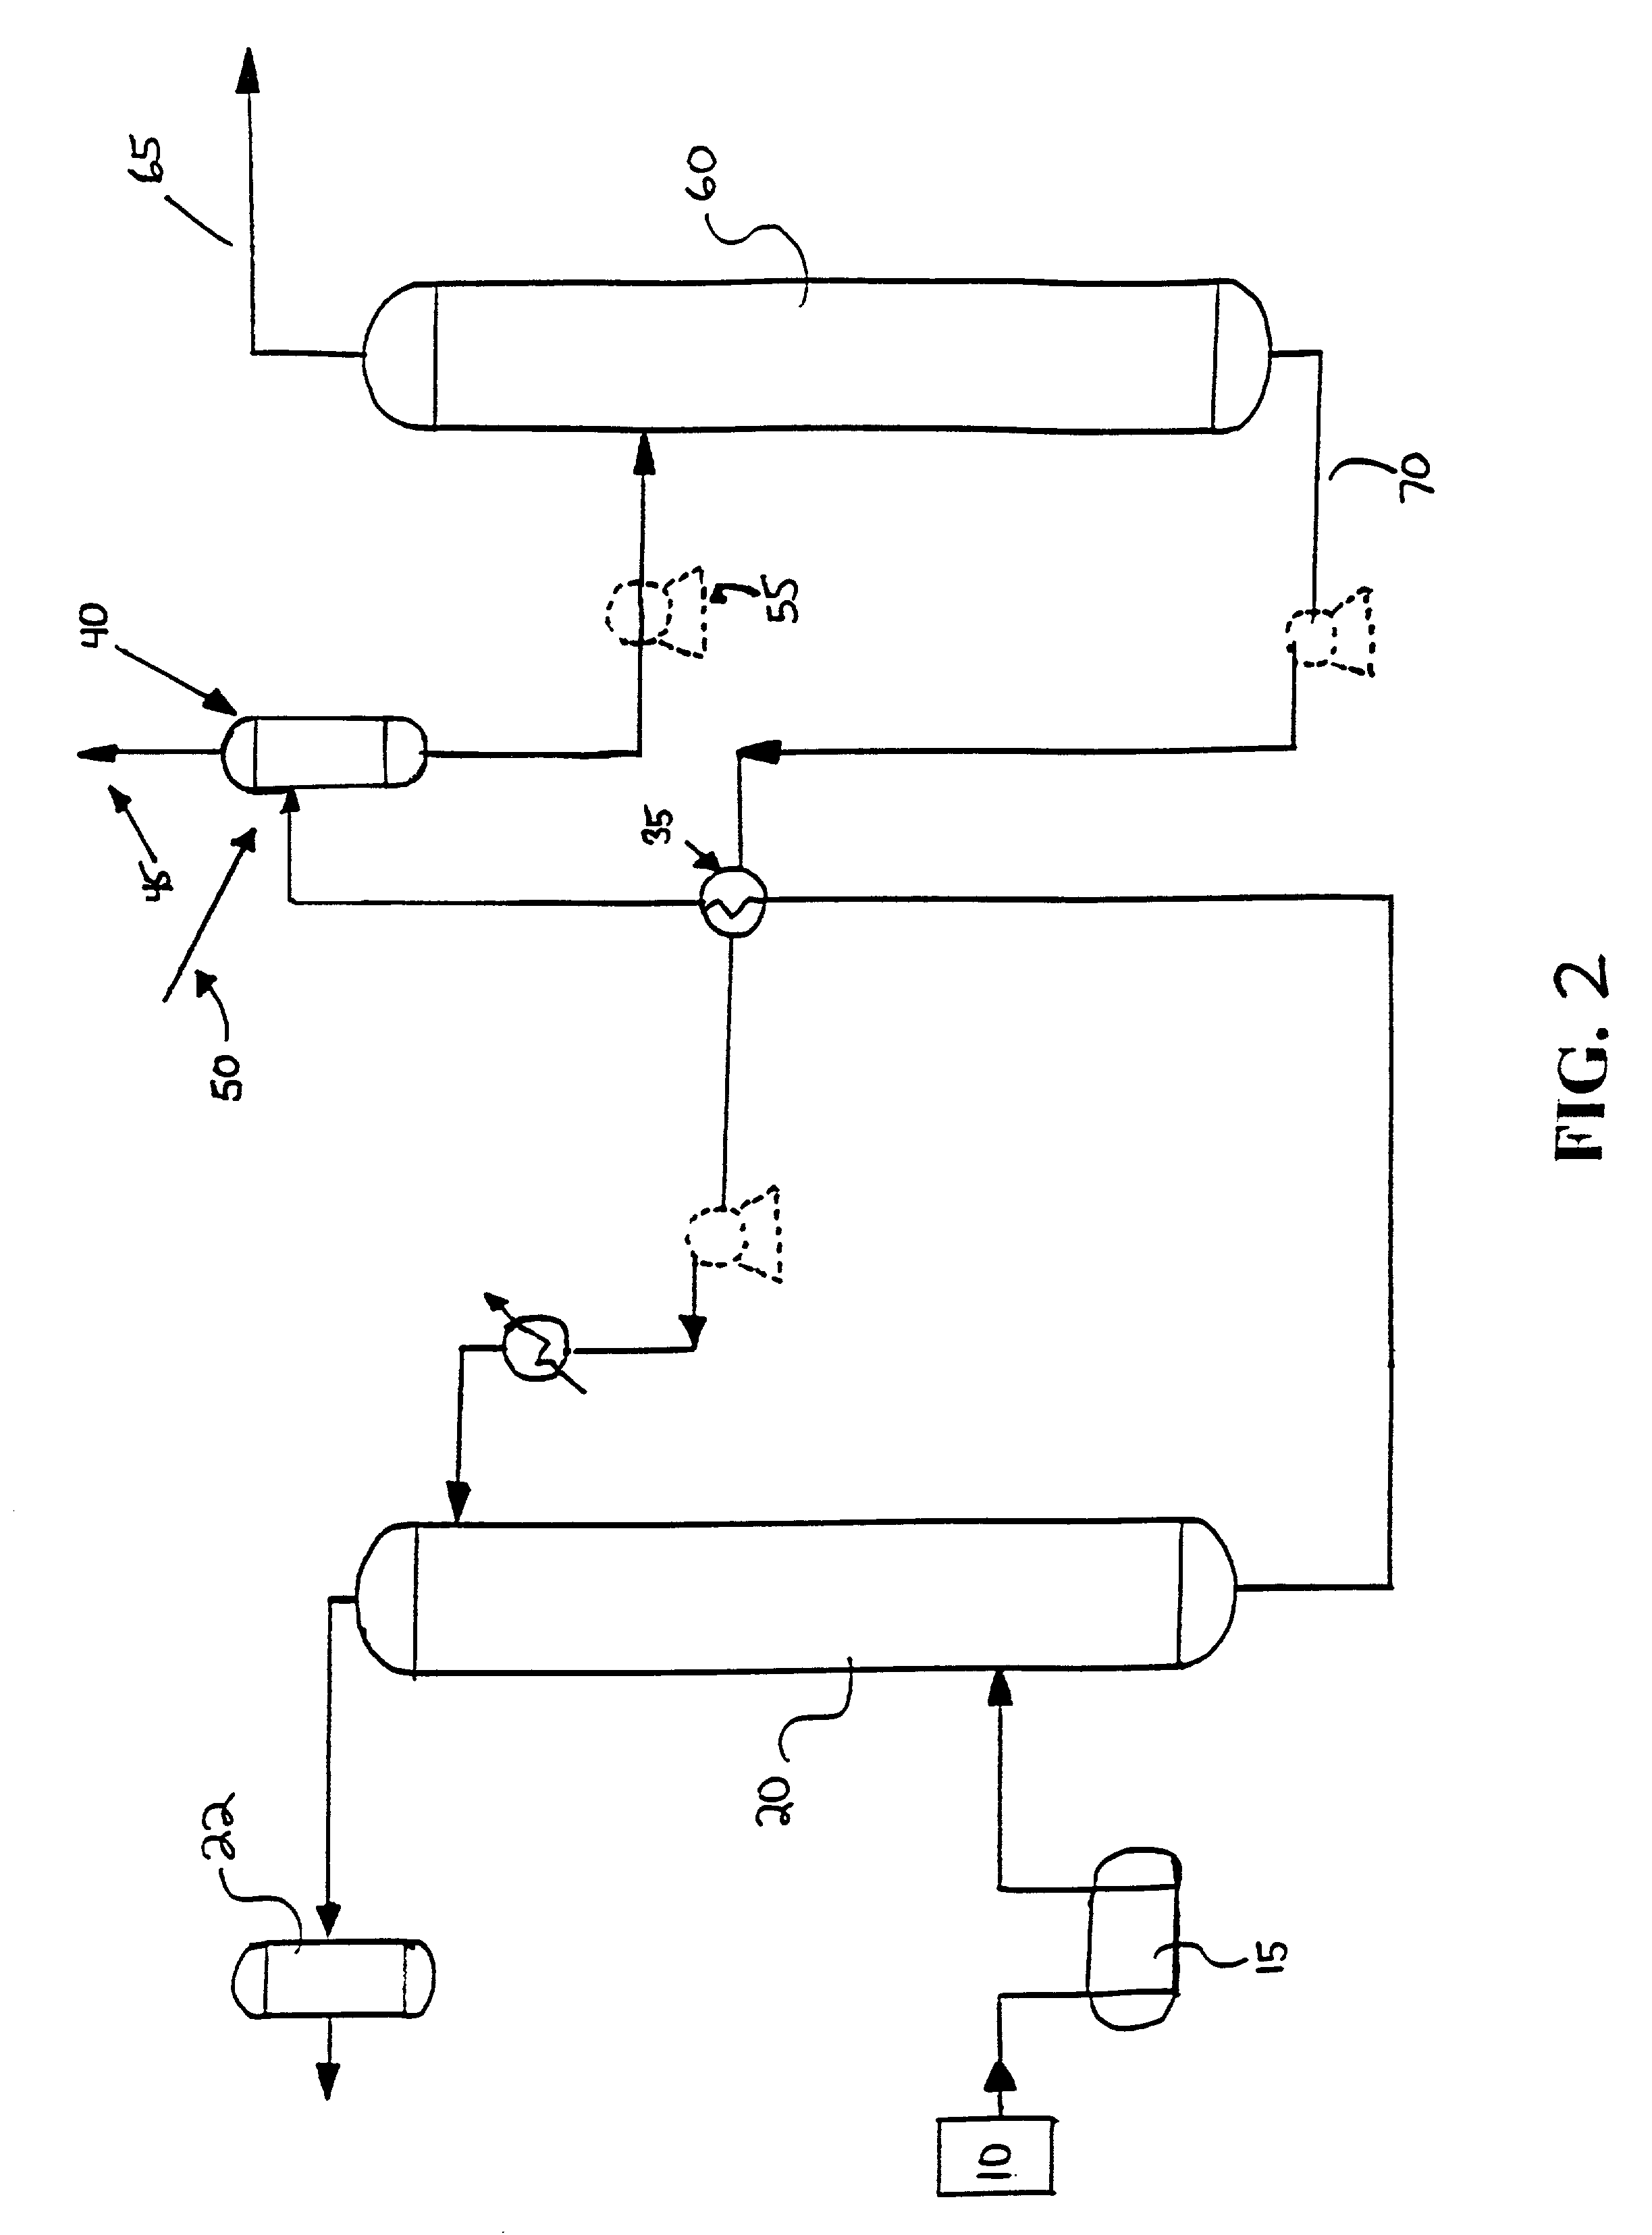 Apparatus and method for exclusively removing VOC from regeneratable solvent in a gas sweetening system